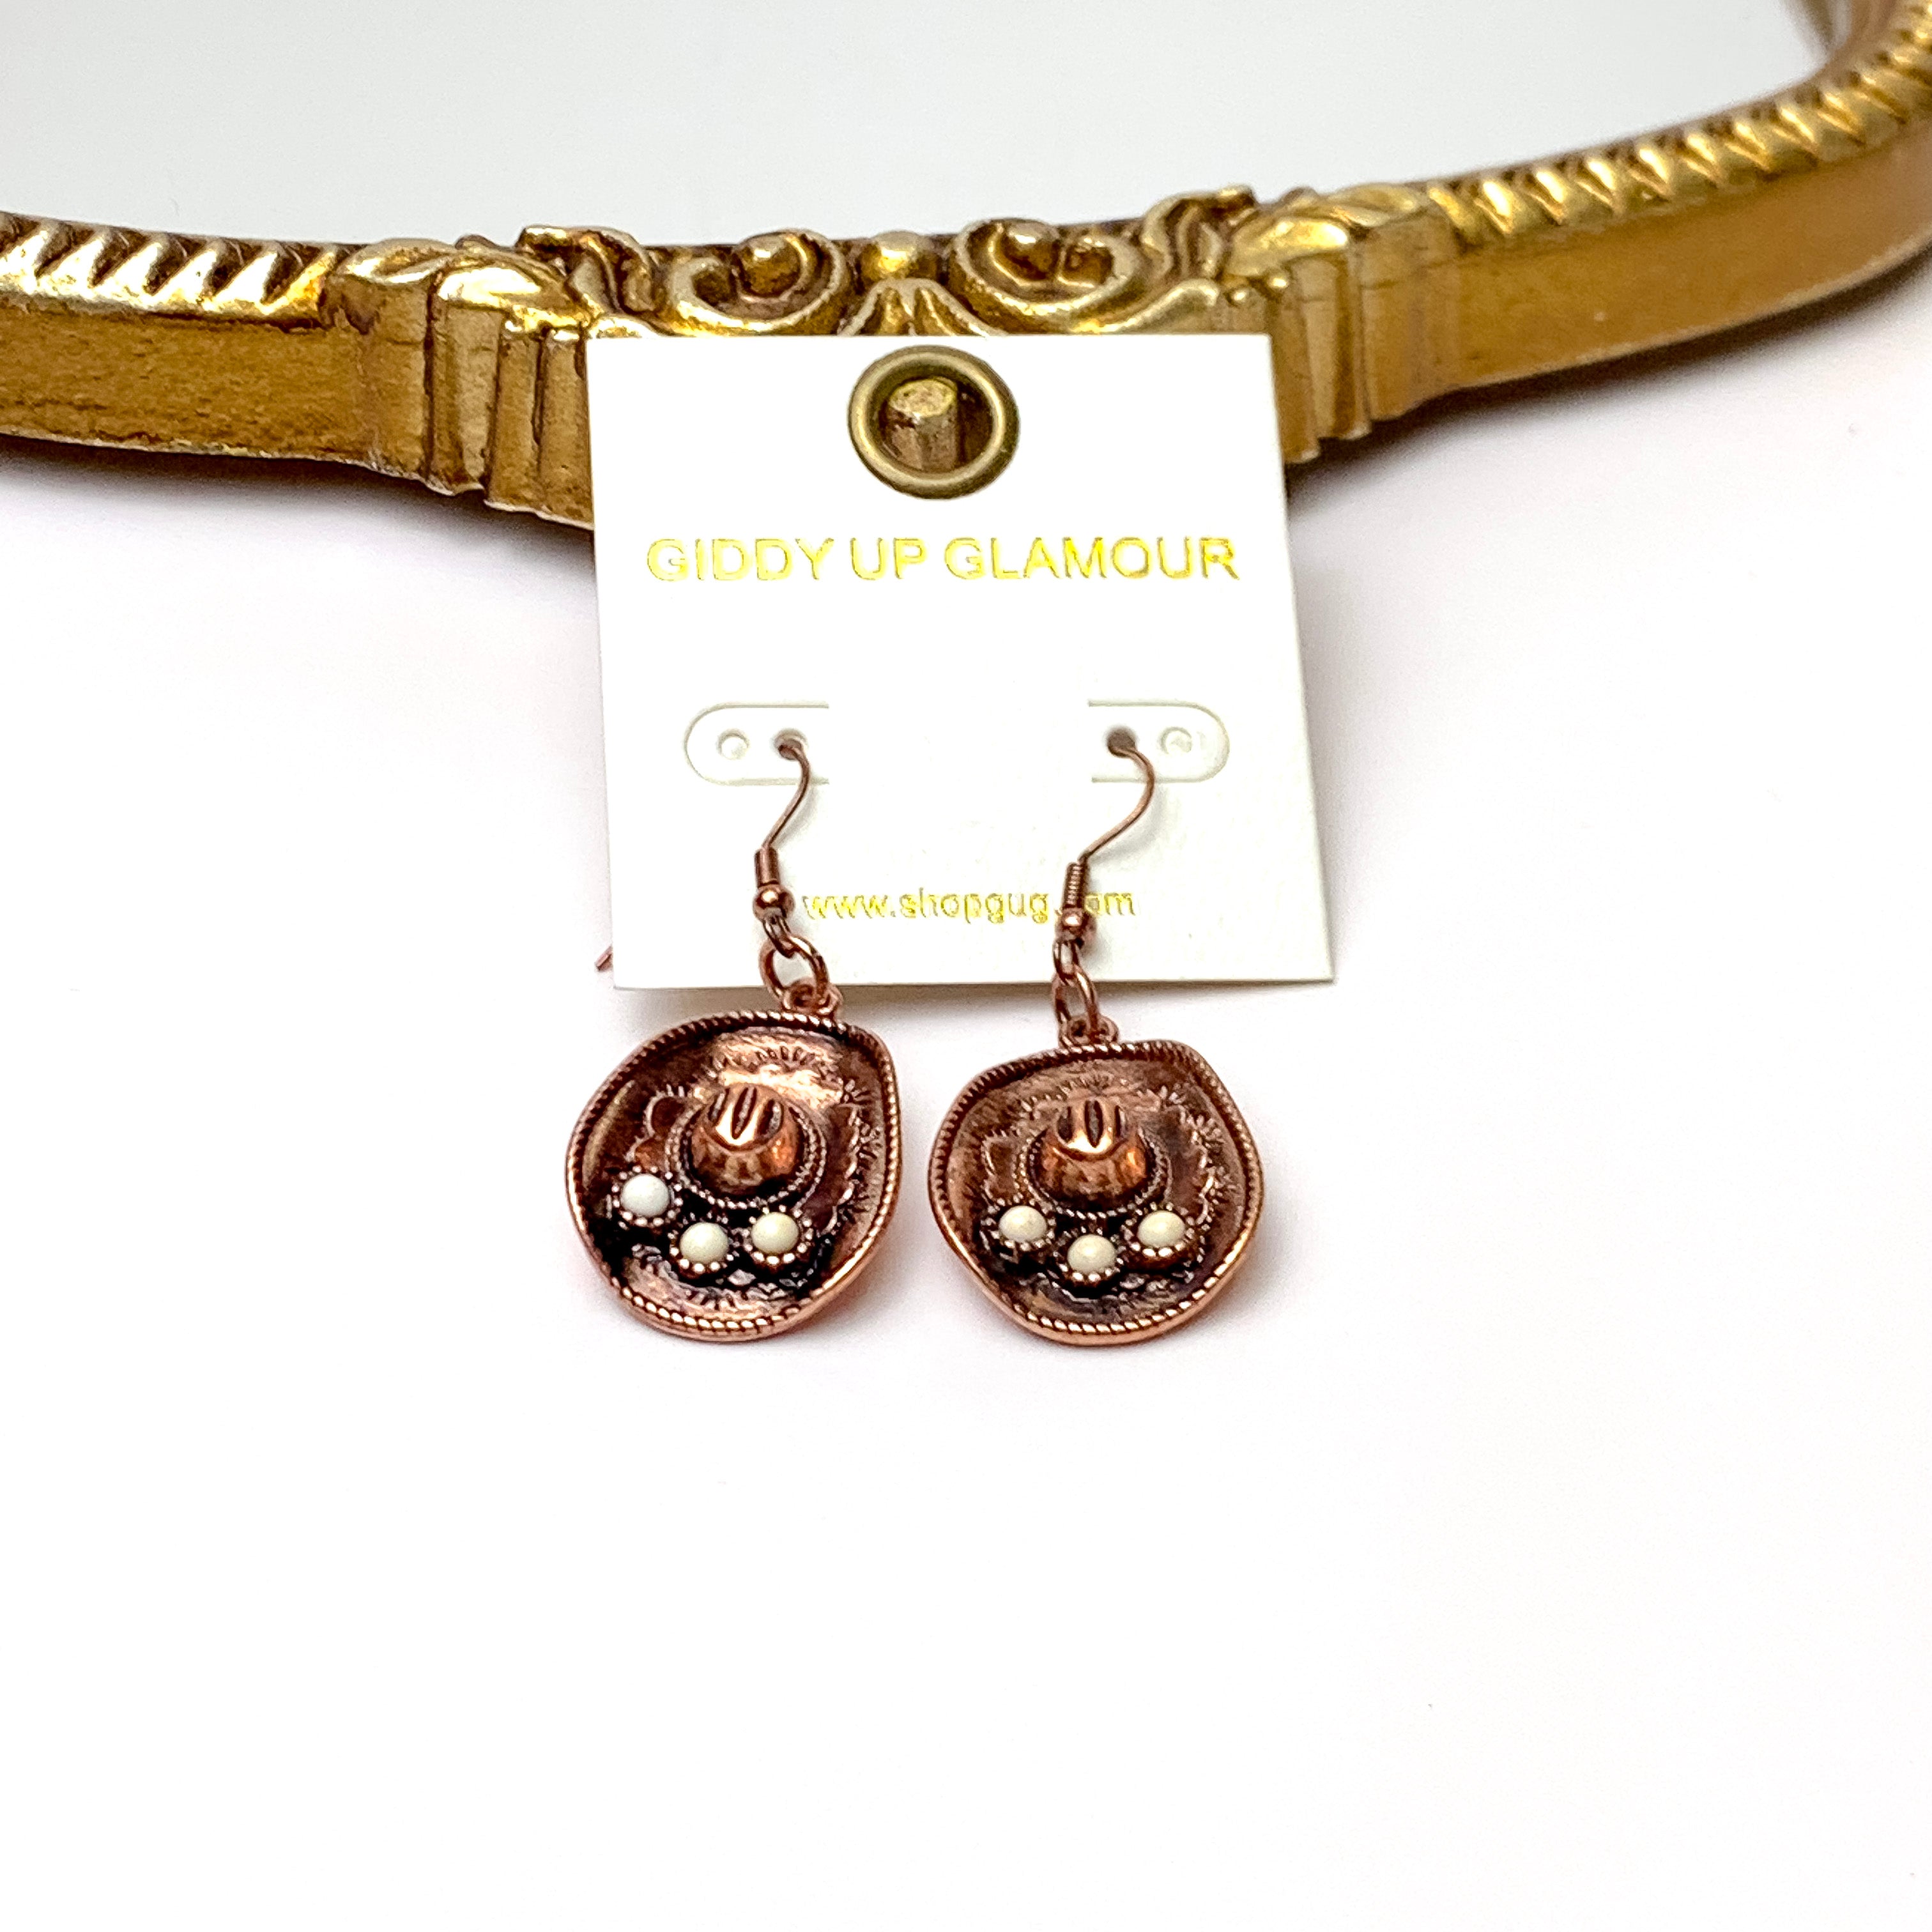 Copper Tone Cowboy Hat Drop Earrings with Faux White Stone Accents - Giddy Up Glamour Boutique